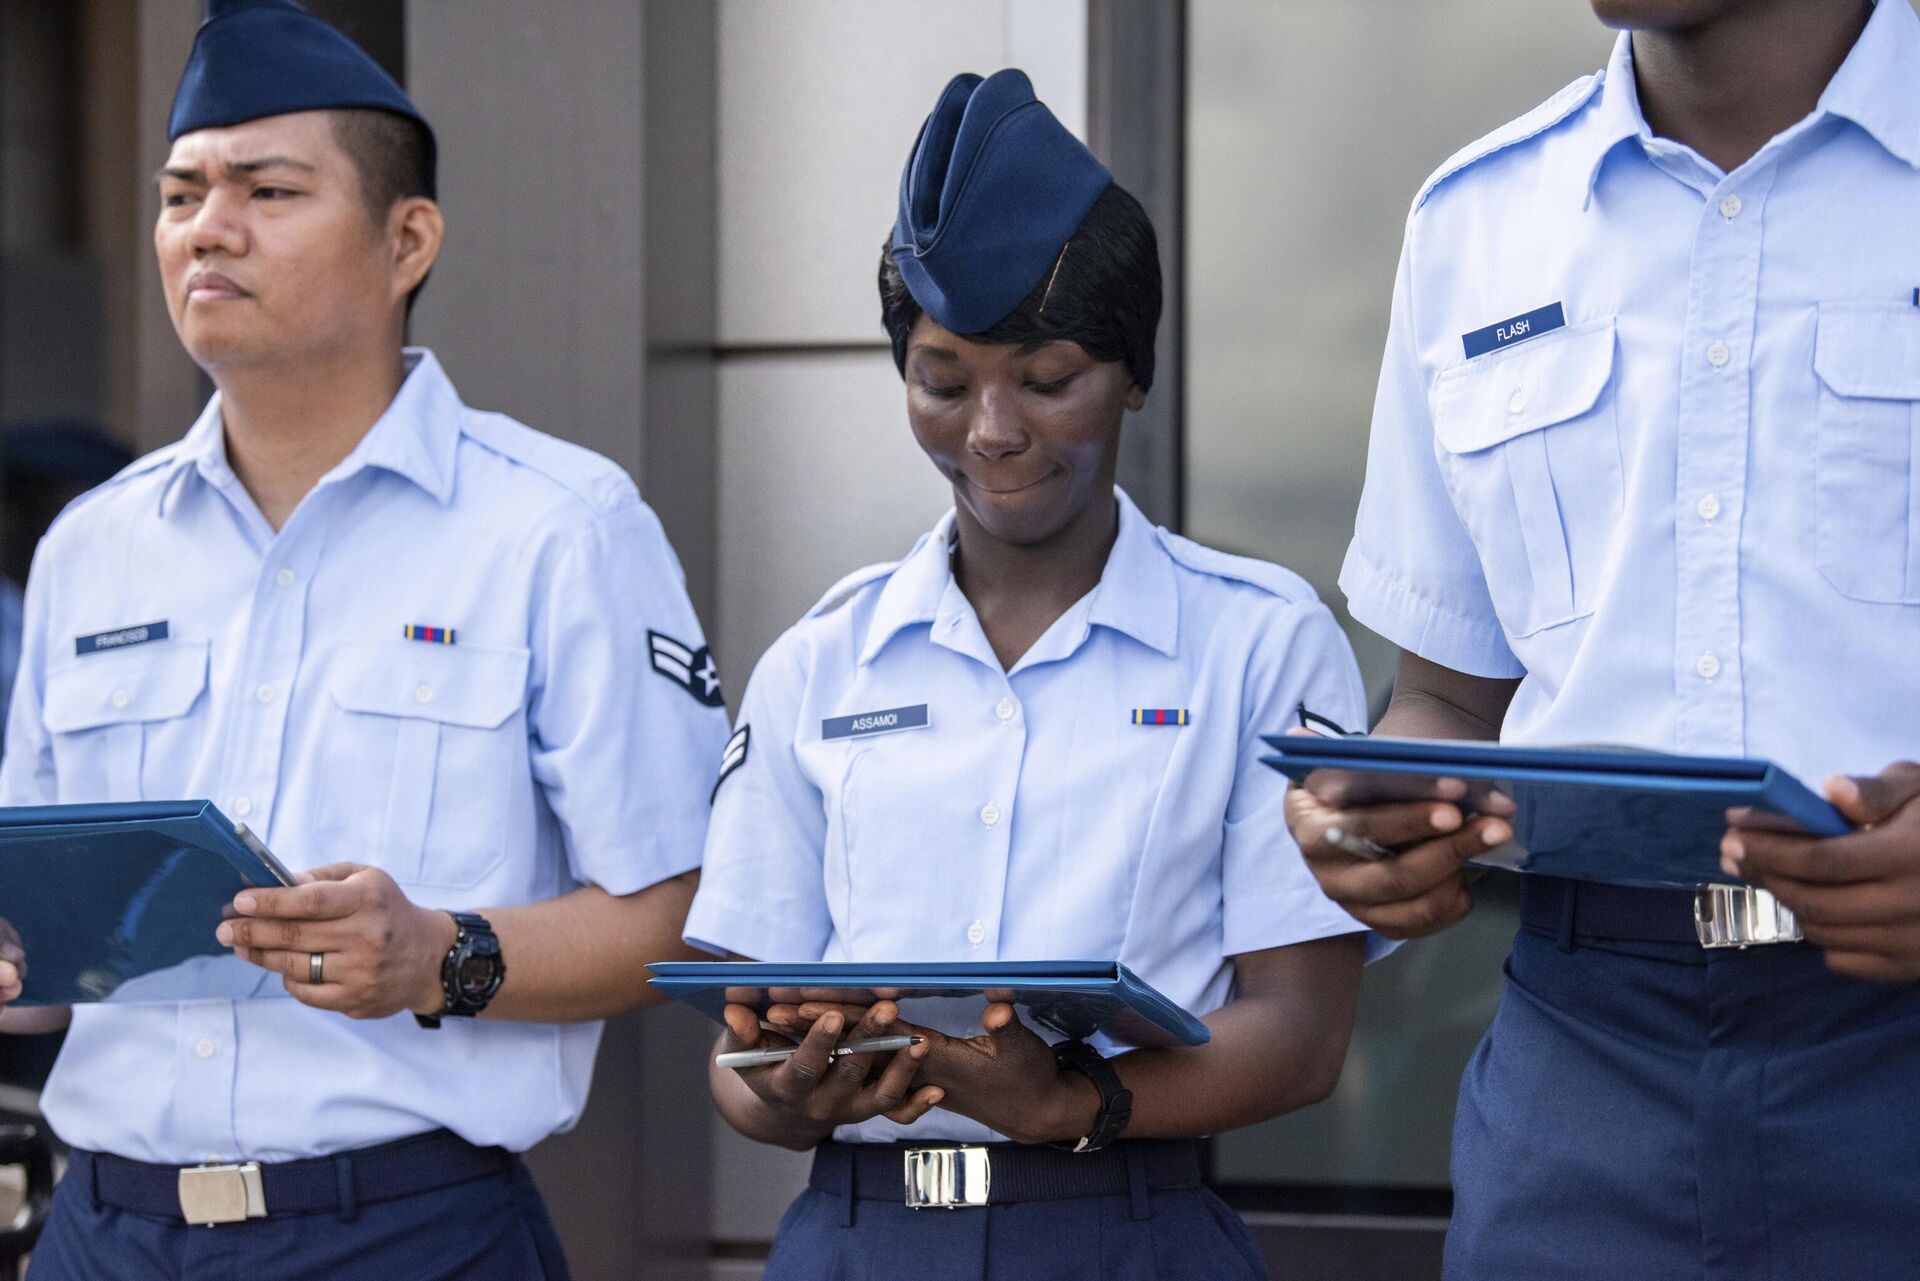 Airman 1st Class Joshua Fancisco, from the Philippines, left, Airman 1st Class D'elbrah Assamoi, from Cote D'Ivoire, center, and Airman 1st Class Jordan Flash, from Jamaica, looks at their U.S. Certificate of Citizenship after signing it following the Basic Military Training Coin Ceremony on April 26, 2023, at Joint Base San Antonio-Lackland, Texas - Sputnik International, 1920, 12.06.2023